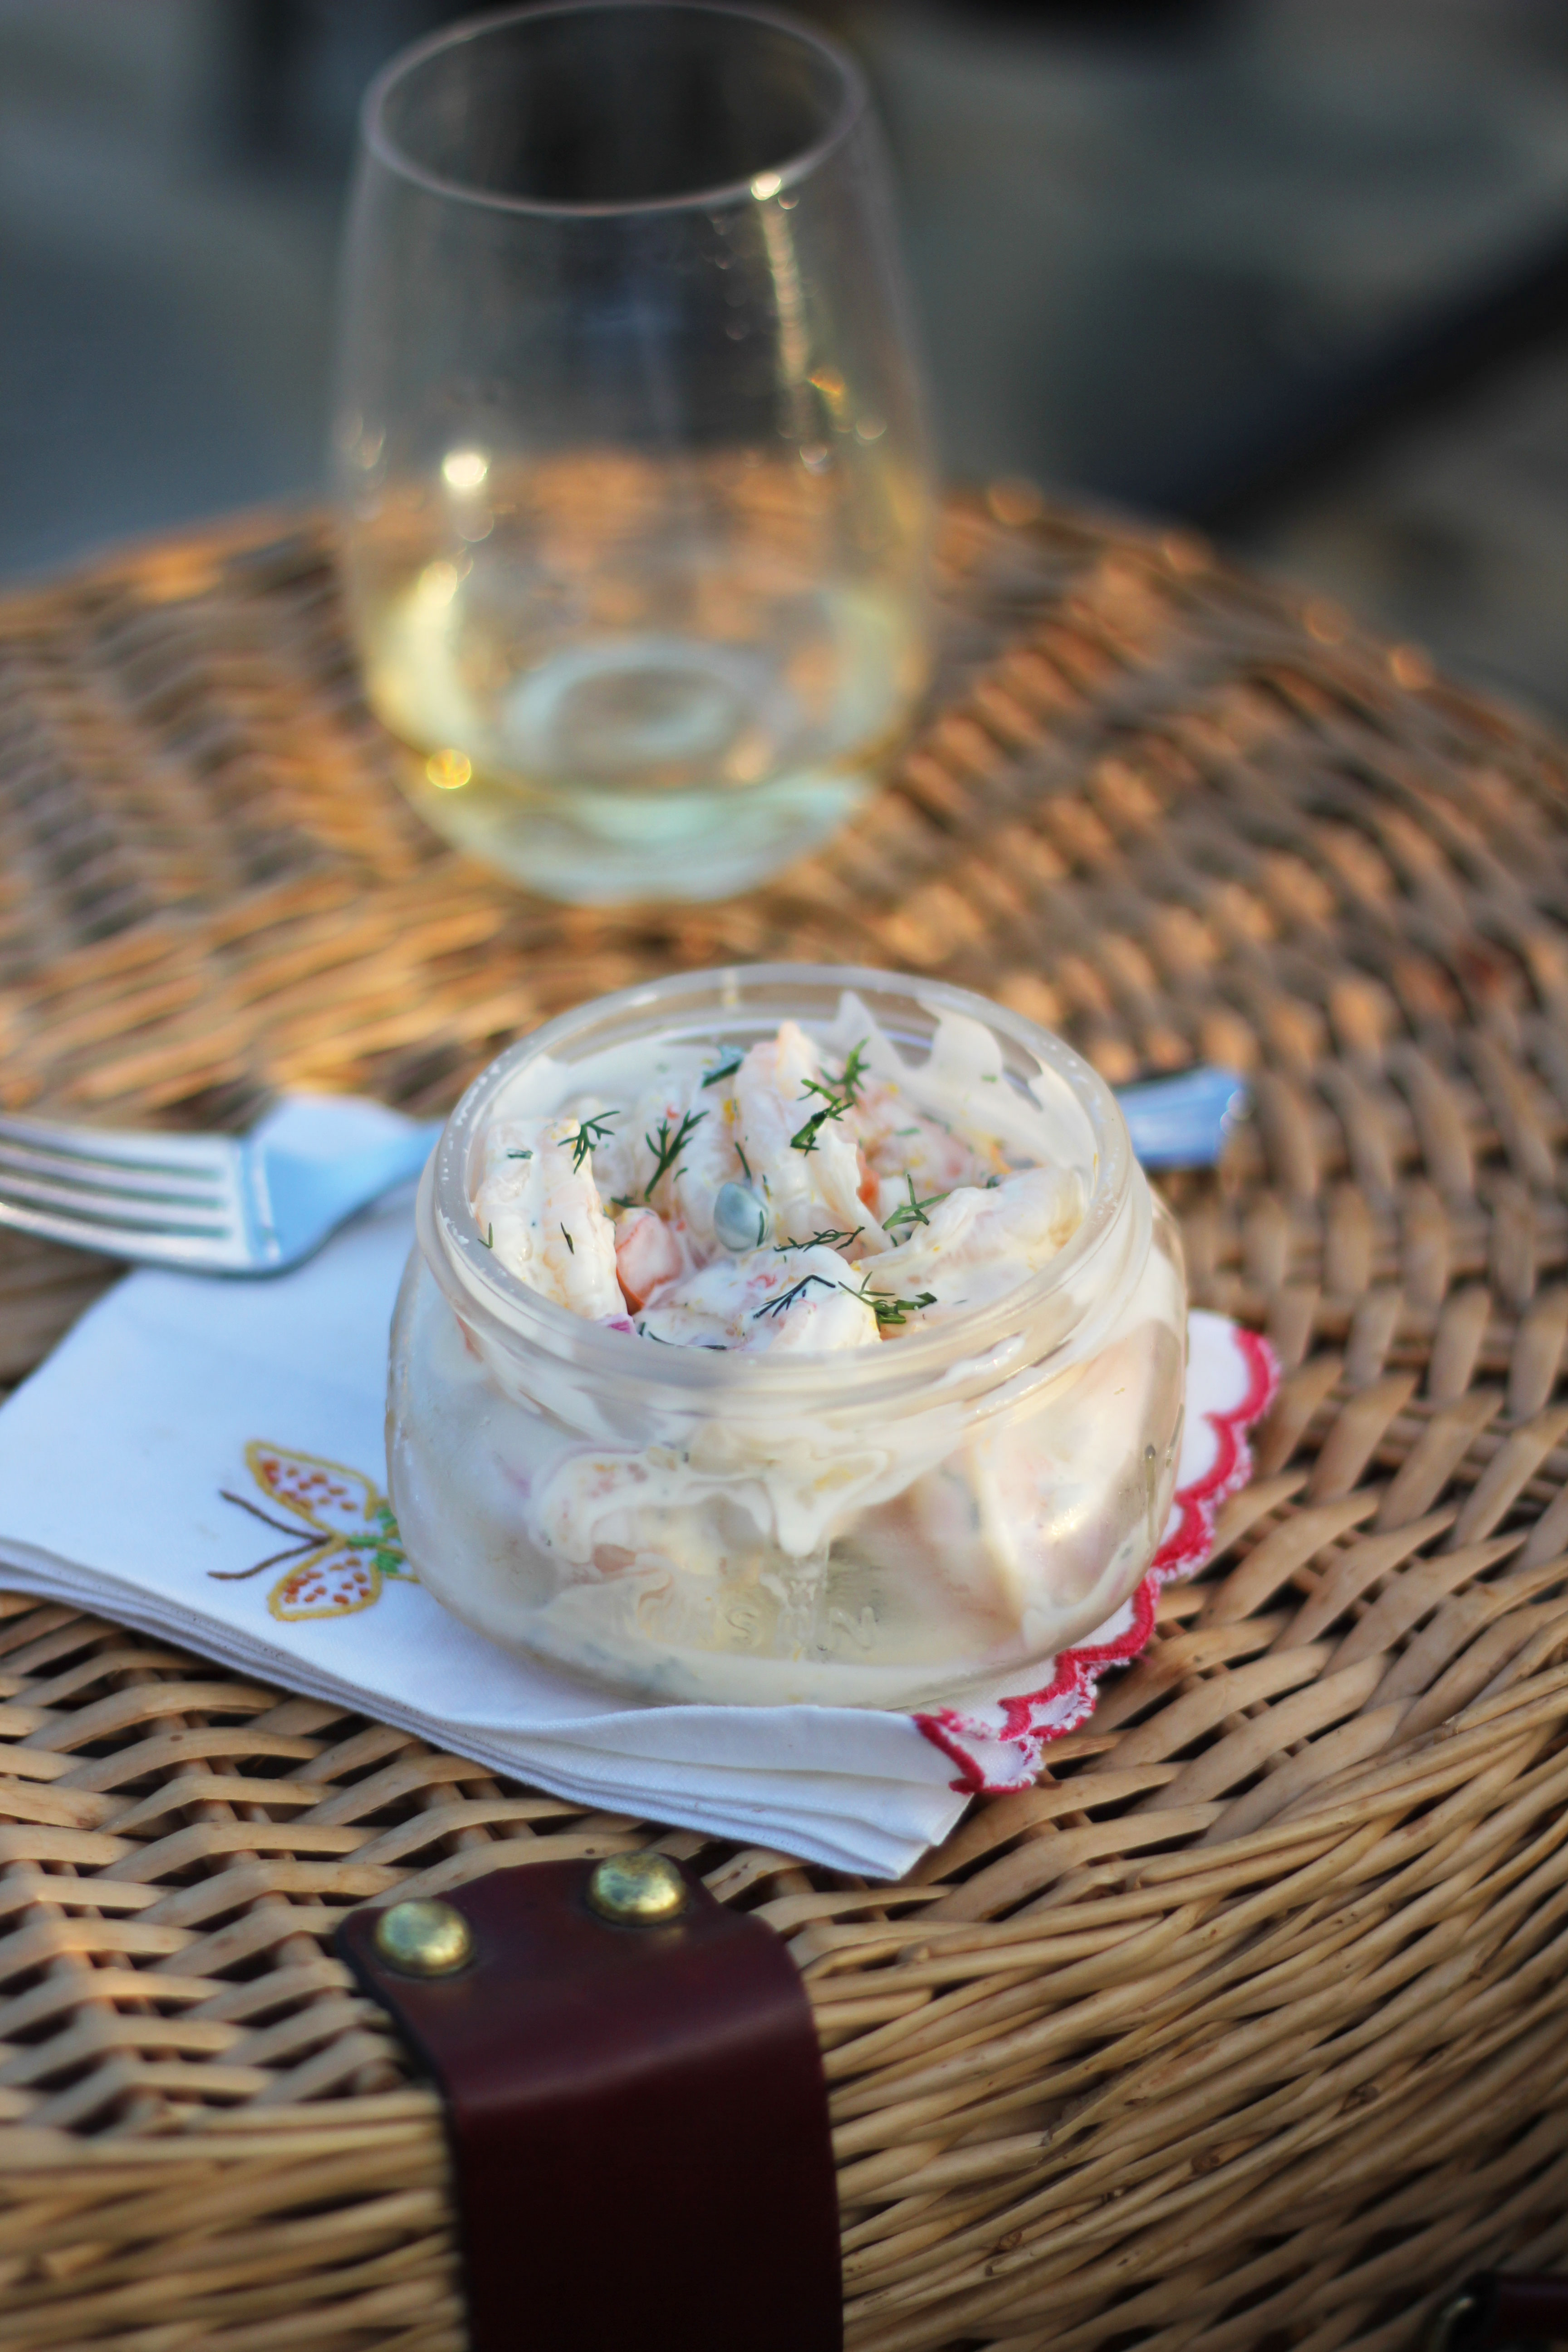 Ina Garten's Roasted Shrimp Salad is perfect for a picnic. Place the prepared salad in individual wide mouth mason jars for easy transport and eating.